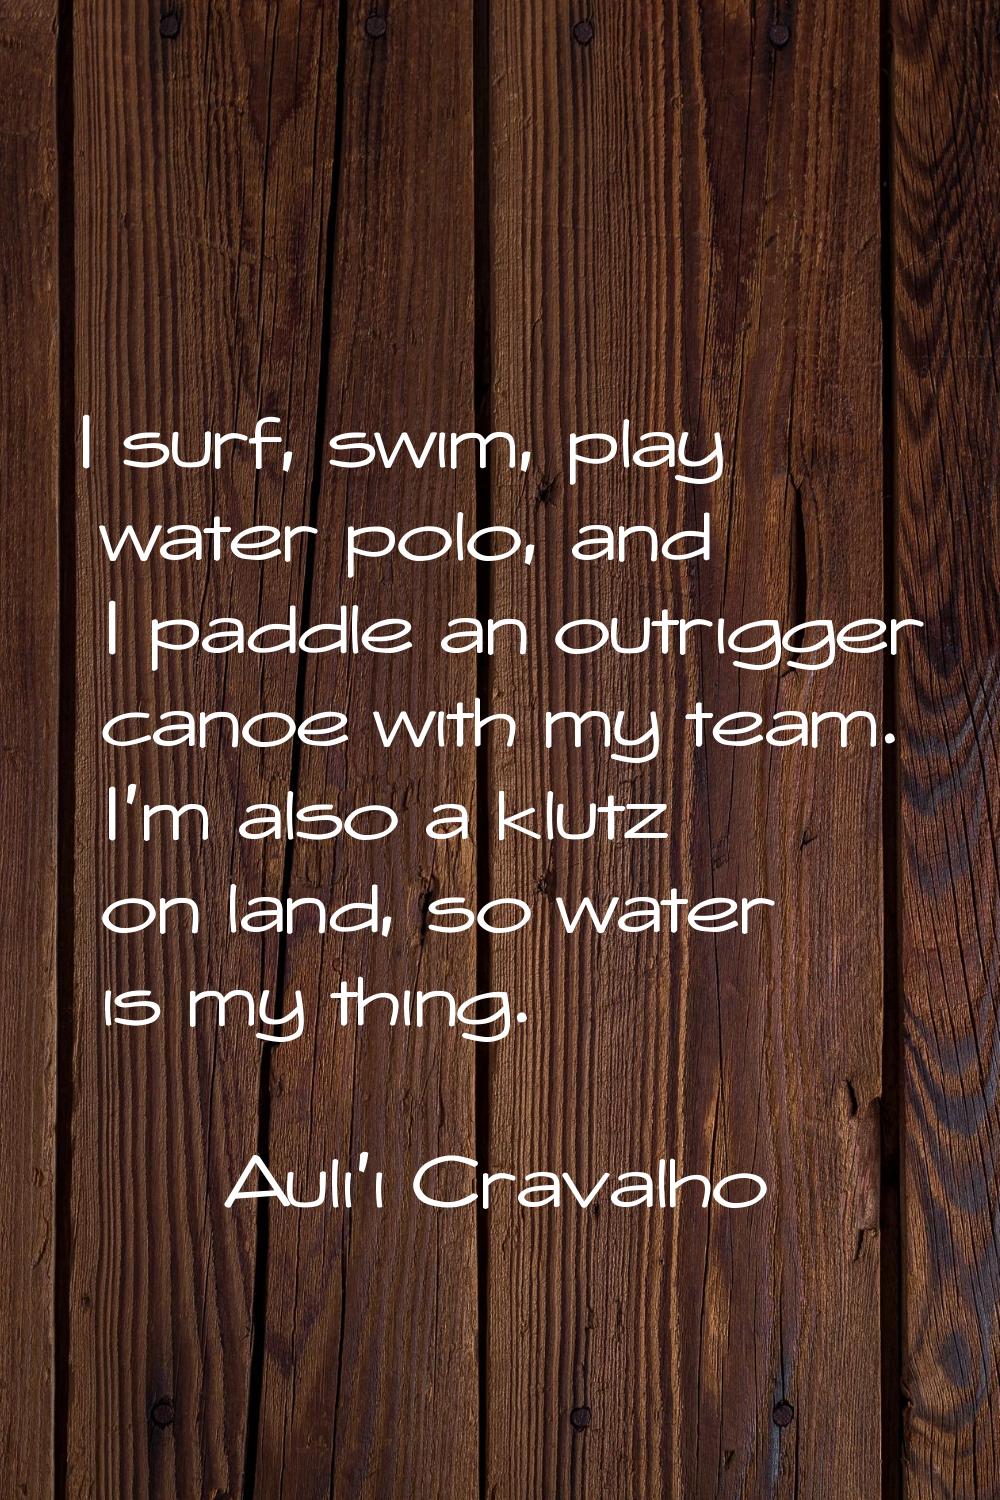 I surf, swim, play water polo, and I paddle an outrigger canoe with my team. I'm also a klutz on la